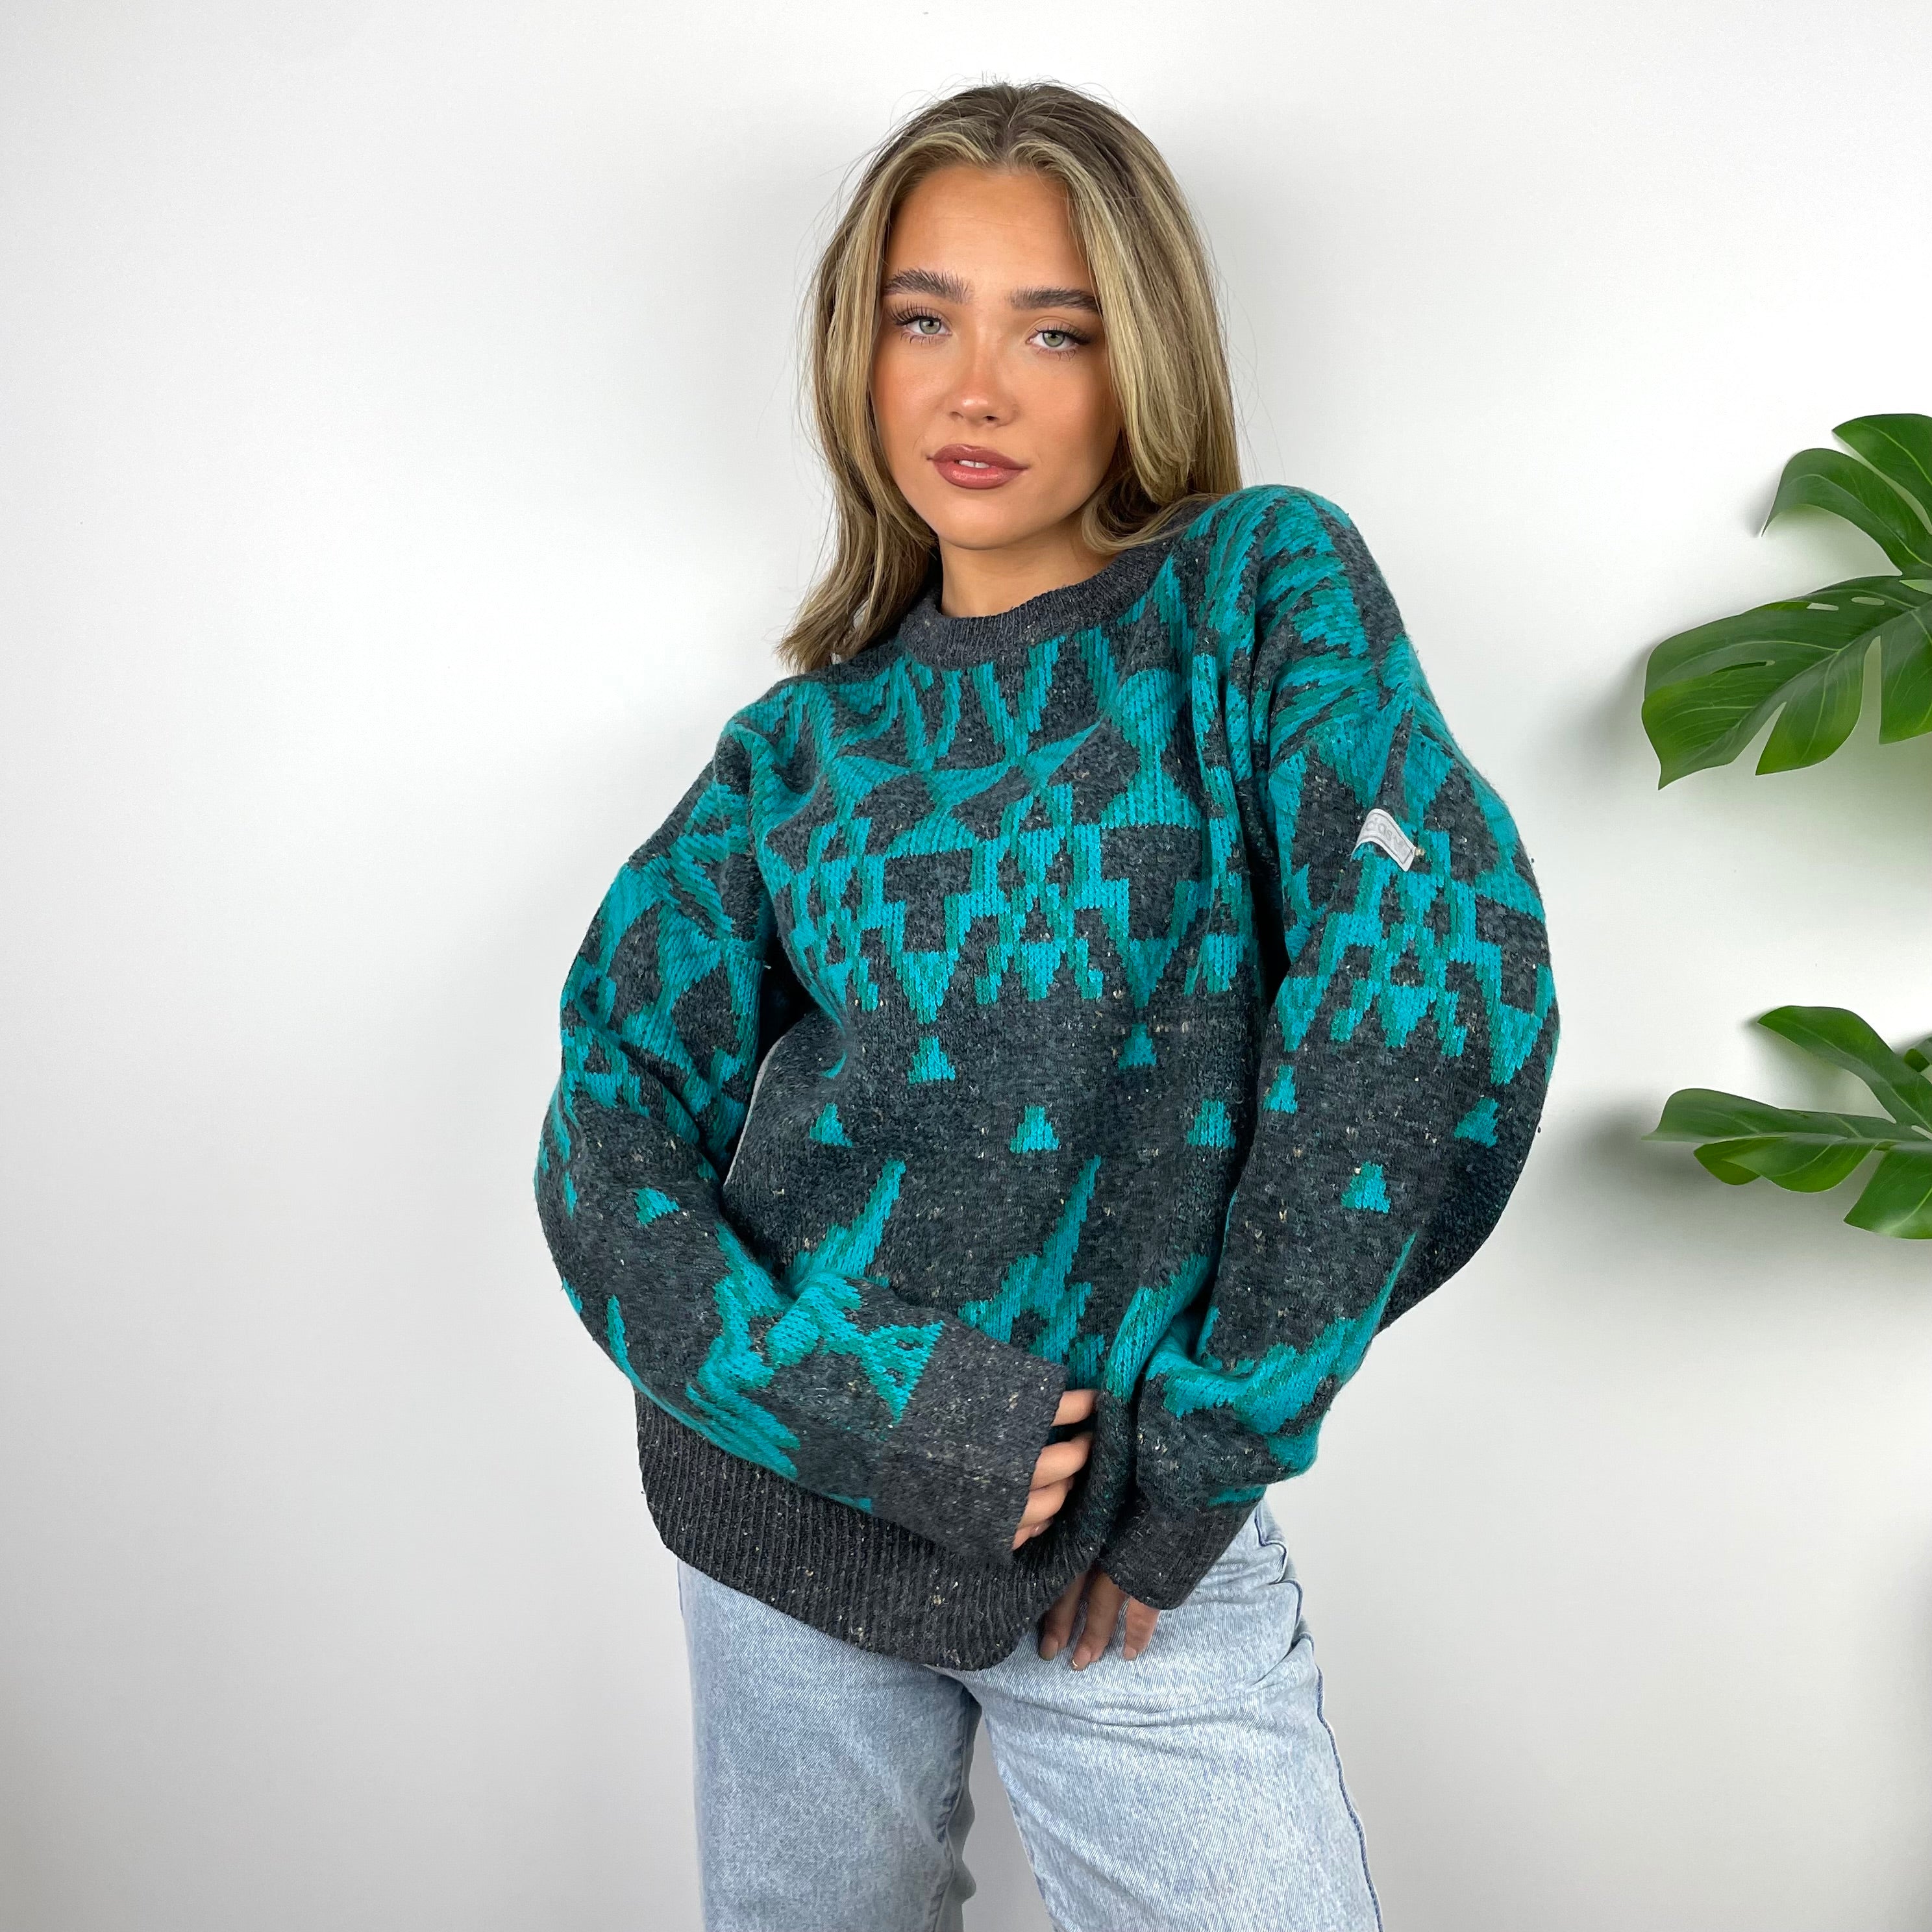 Adidas RARE Grey & Turquoise Blue Embroidered Spell Out Funky Chunky Knit Jumper (M)